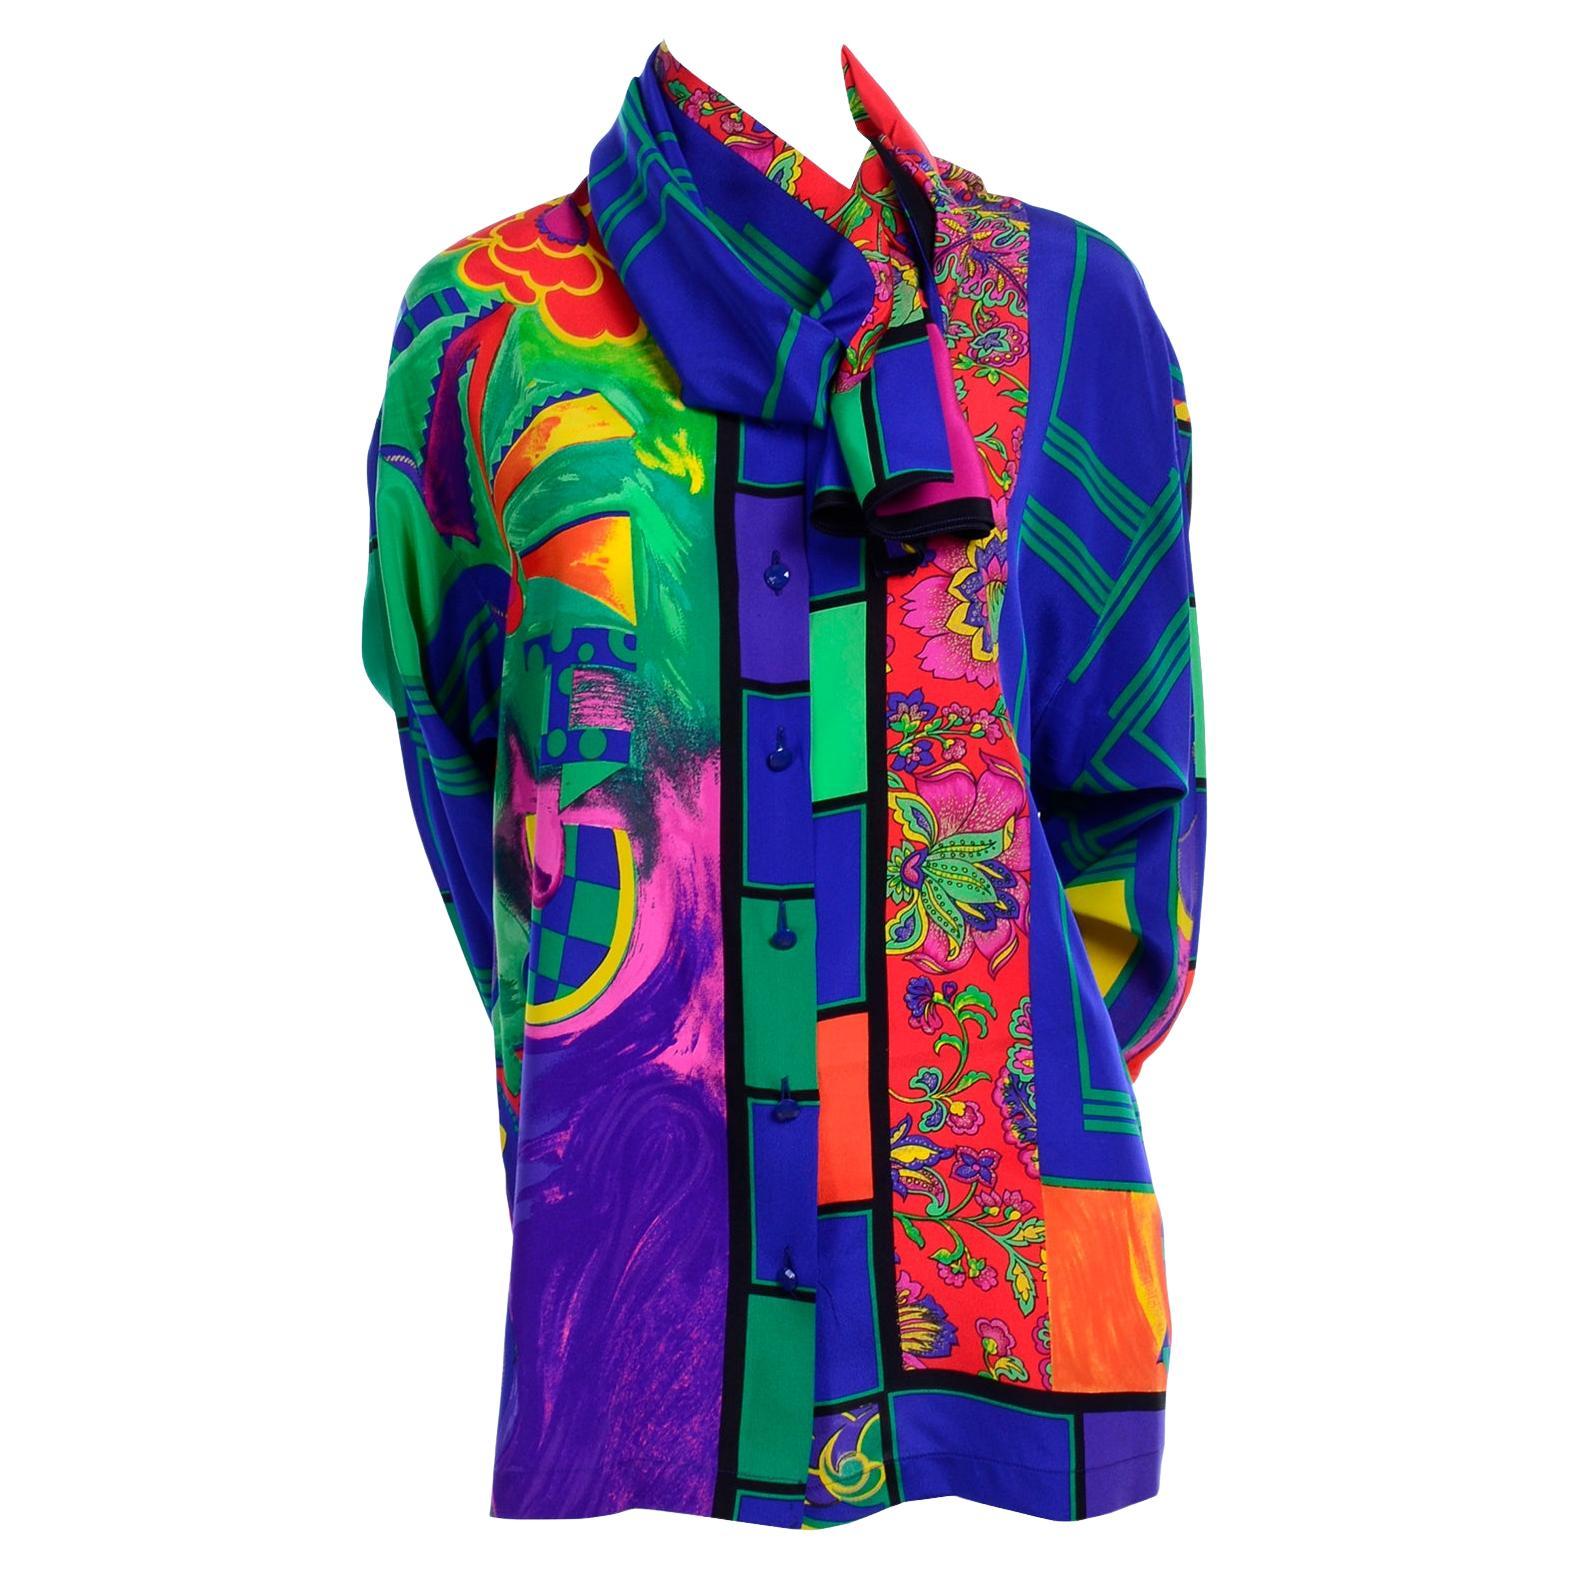 Gianni Versace Early 1990s Bright Colorful Vintage Silk Print Shirt & Huge Scarf